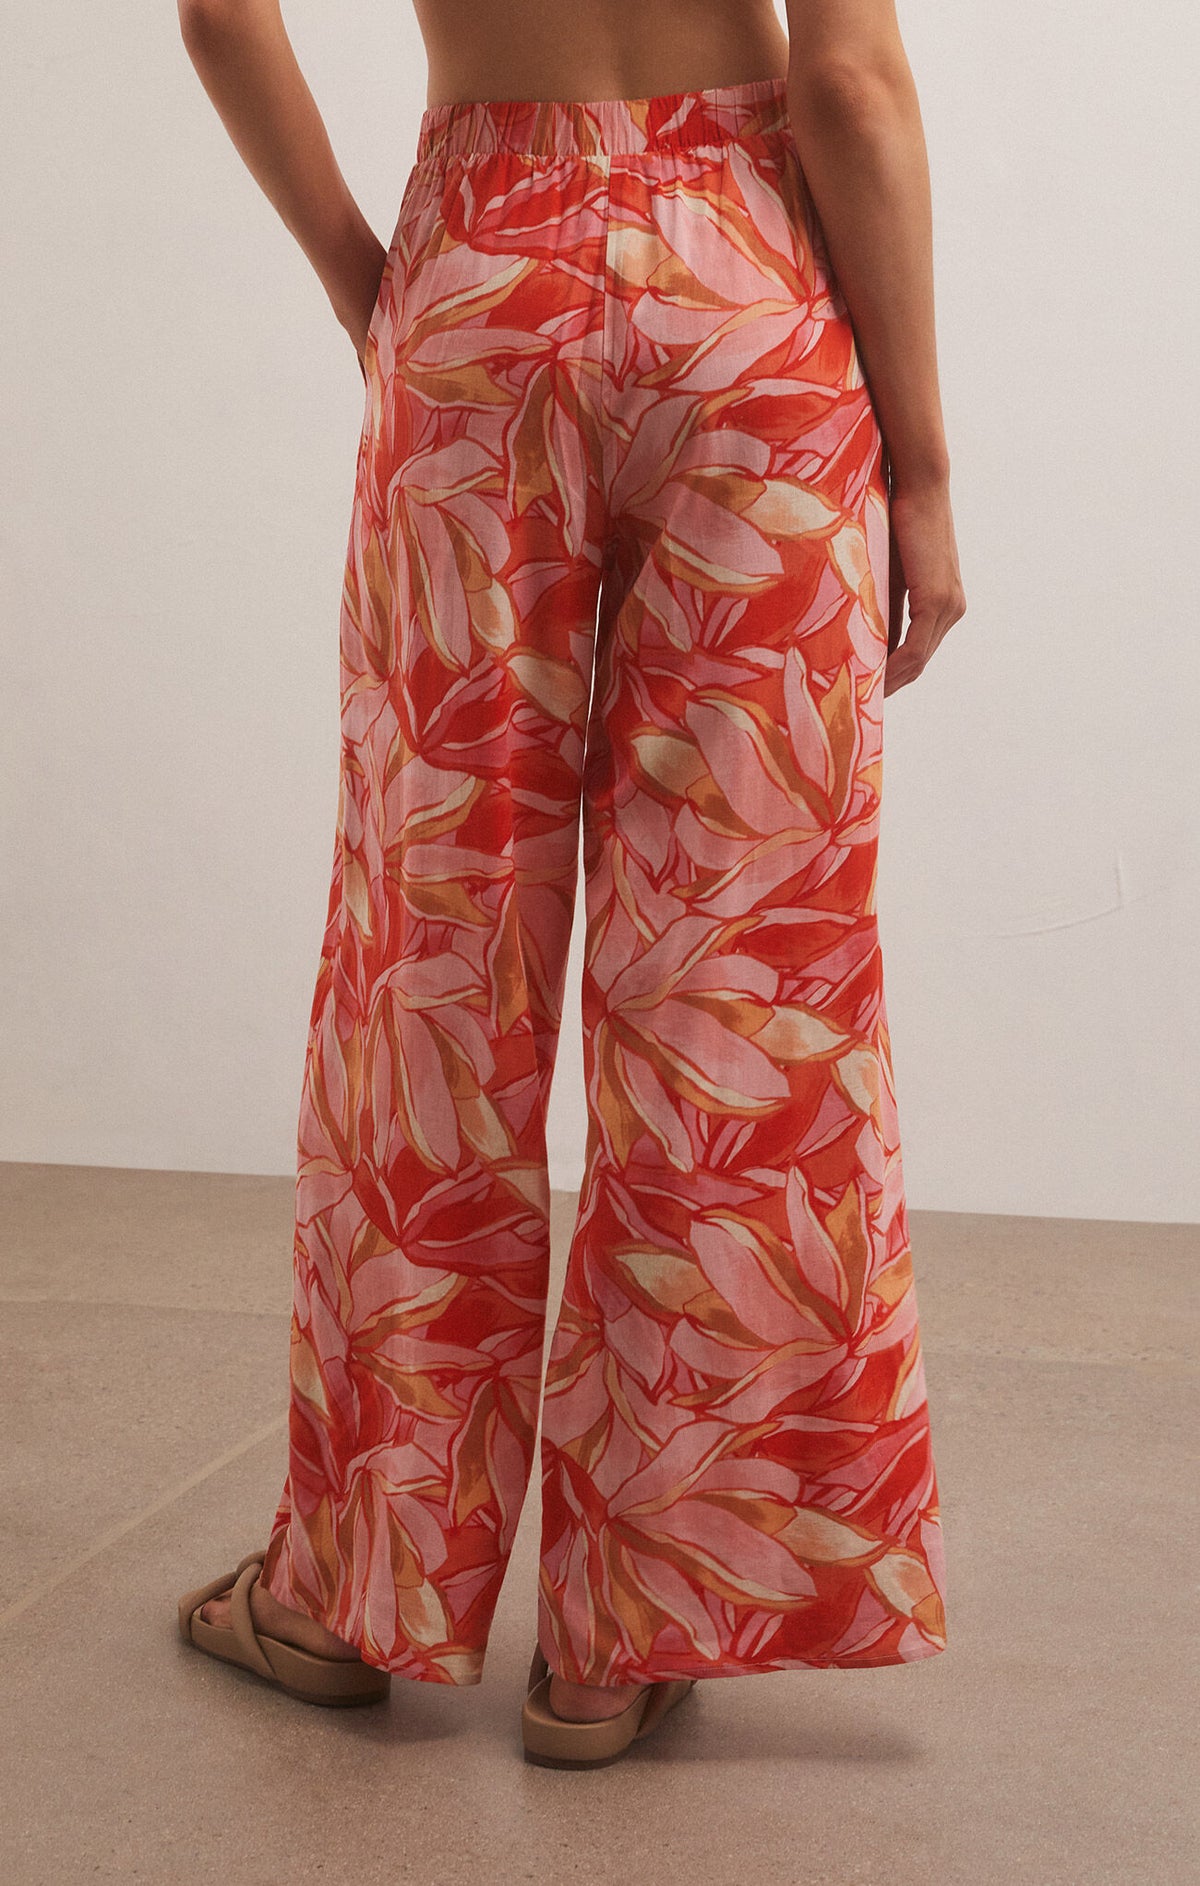 Charmaine Stained Glass Pant - Sophie